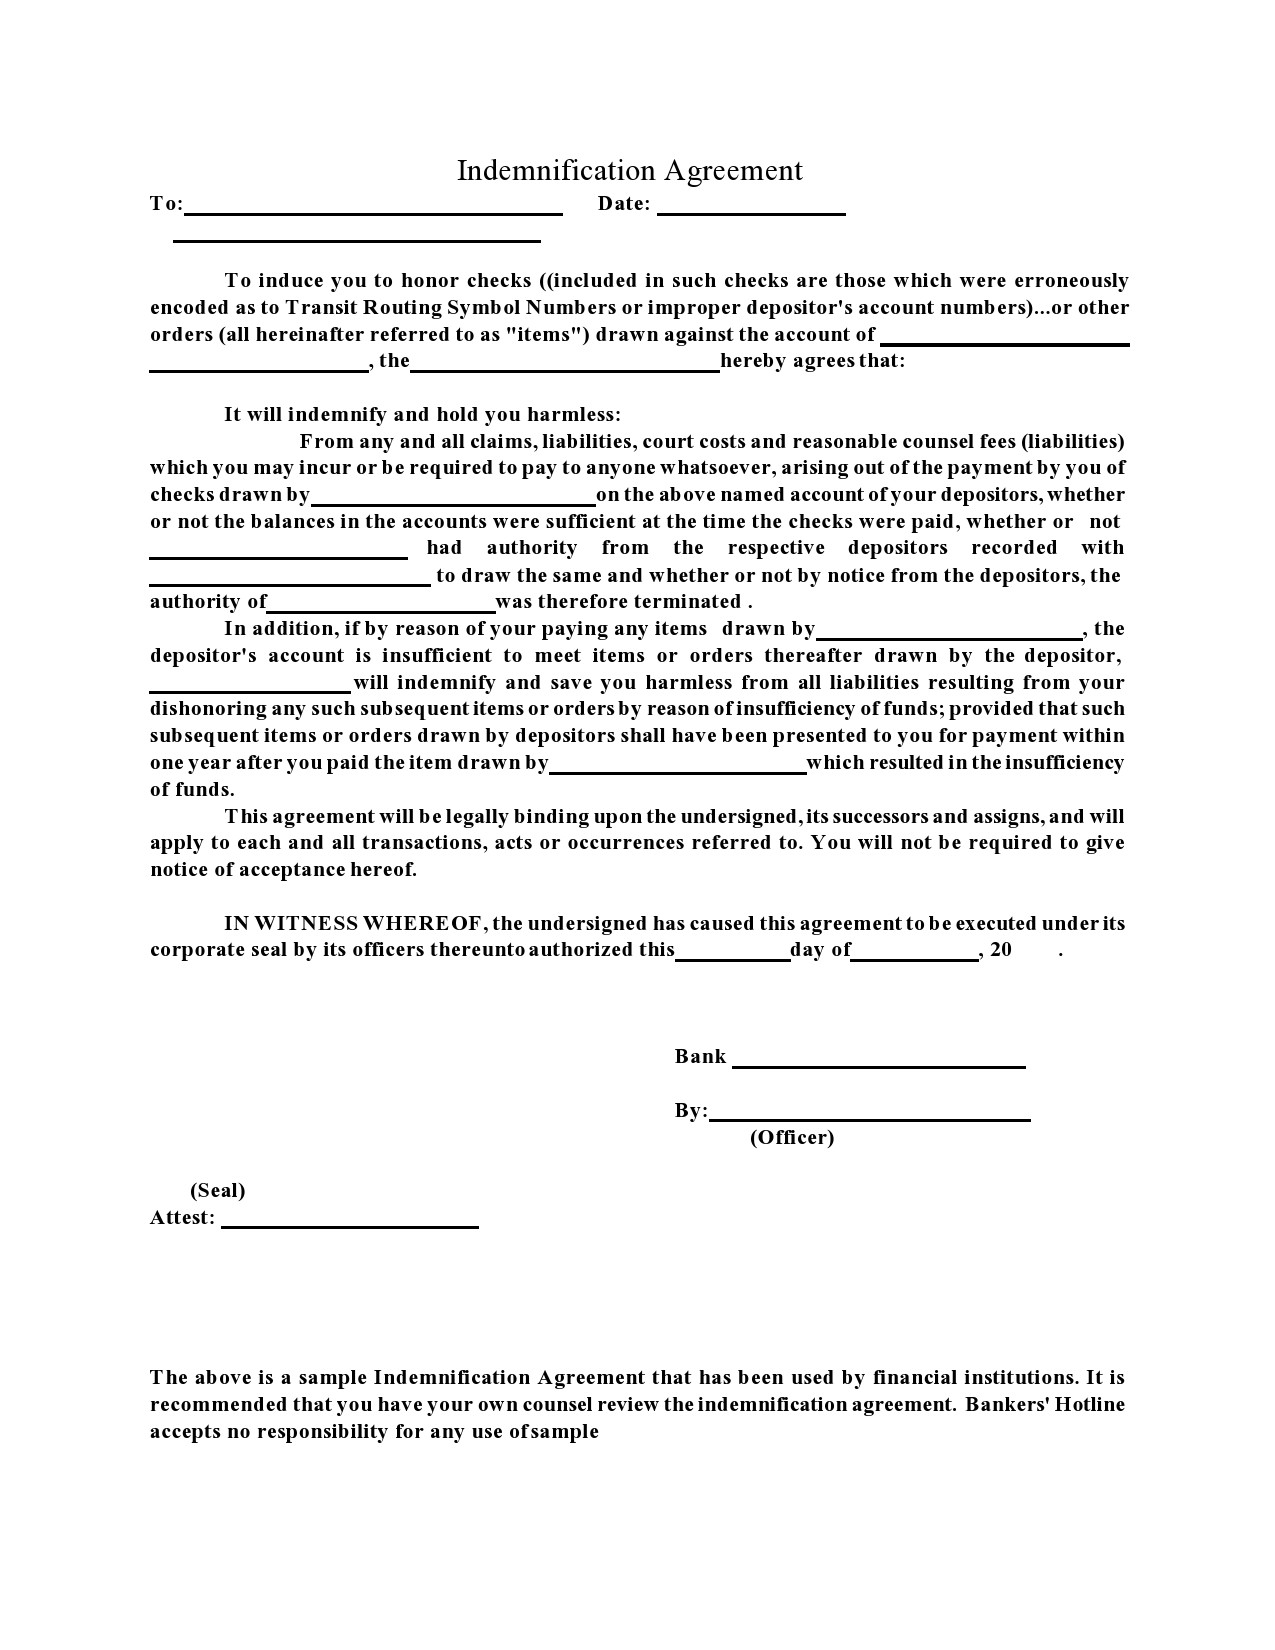 Free indemnification agreement 25